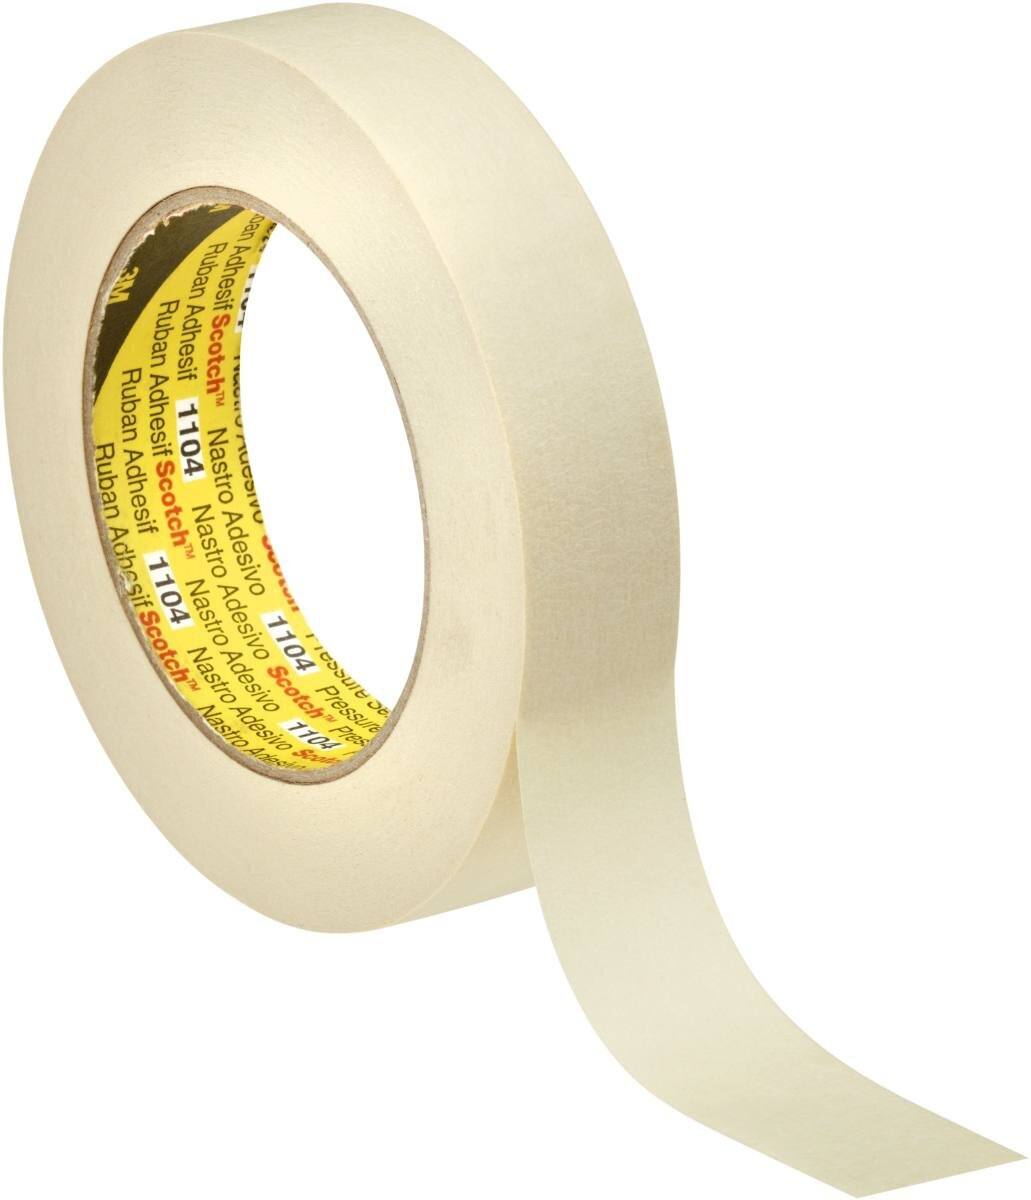 3M Scotch Special Painting Masking Tape 1104, Beige, 18 mm x 50 m, 0.155 mm